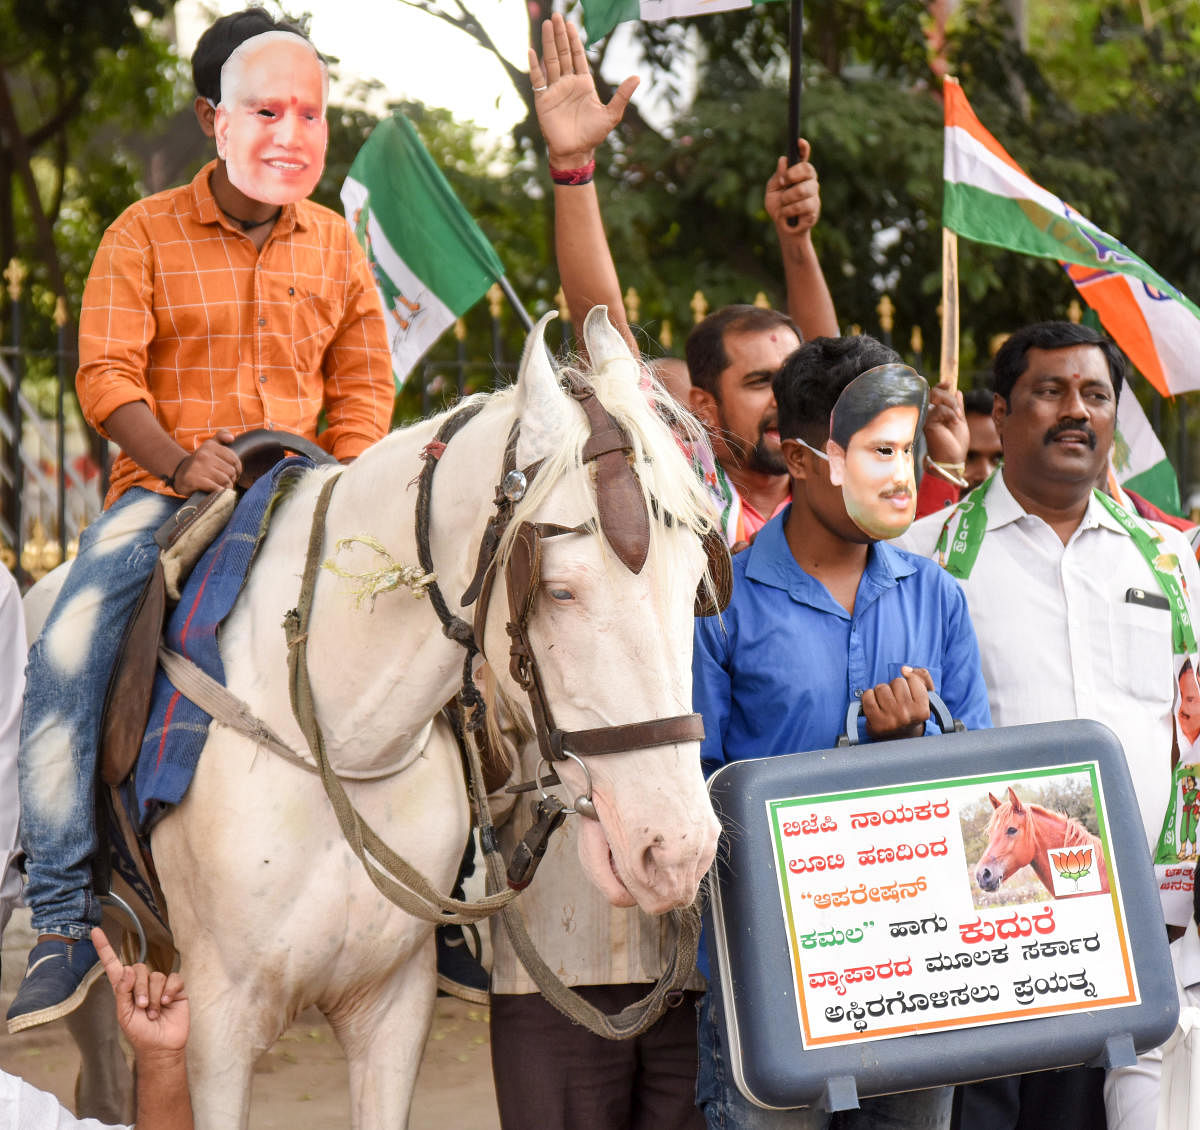 Congress members tage a protest accusing the BJP of horse-trading for capturing power in the state, in Bengaluru on Monday. DH Photo